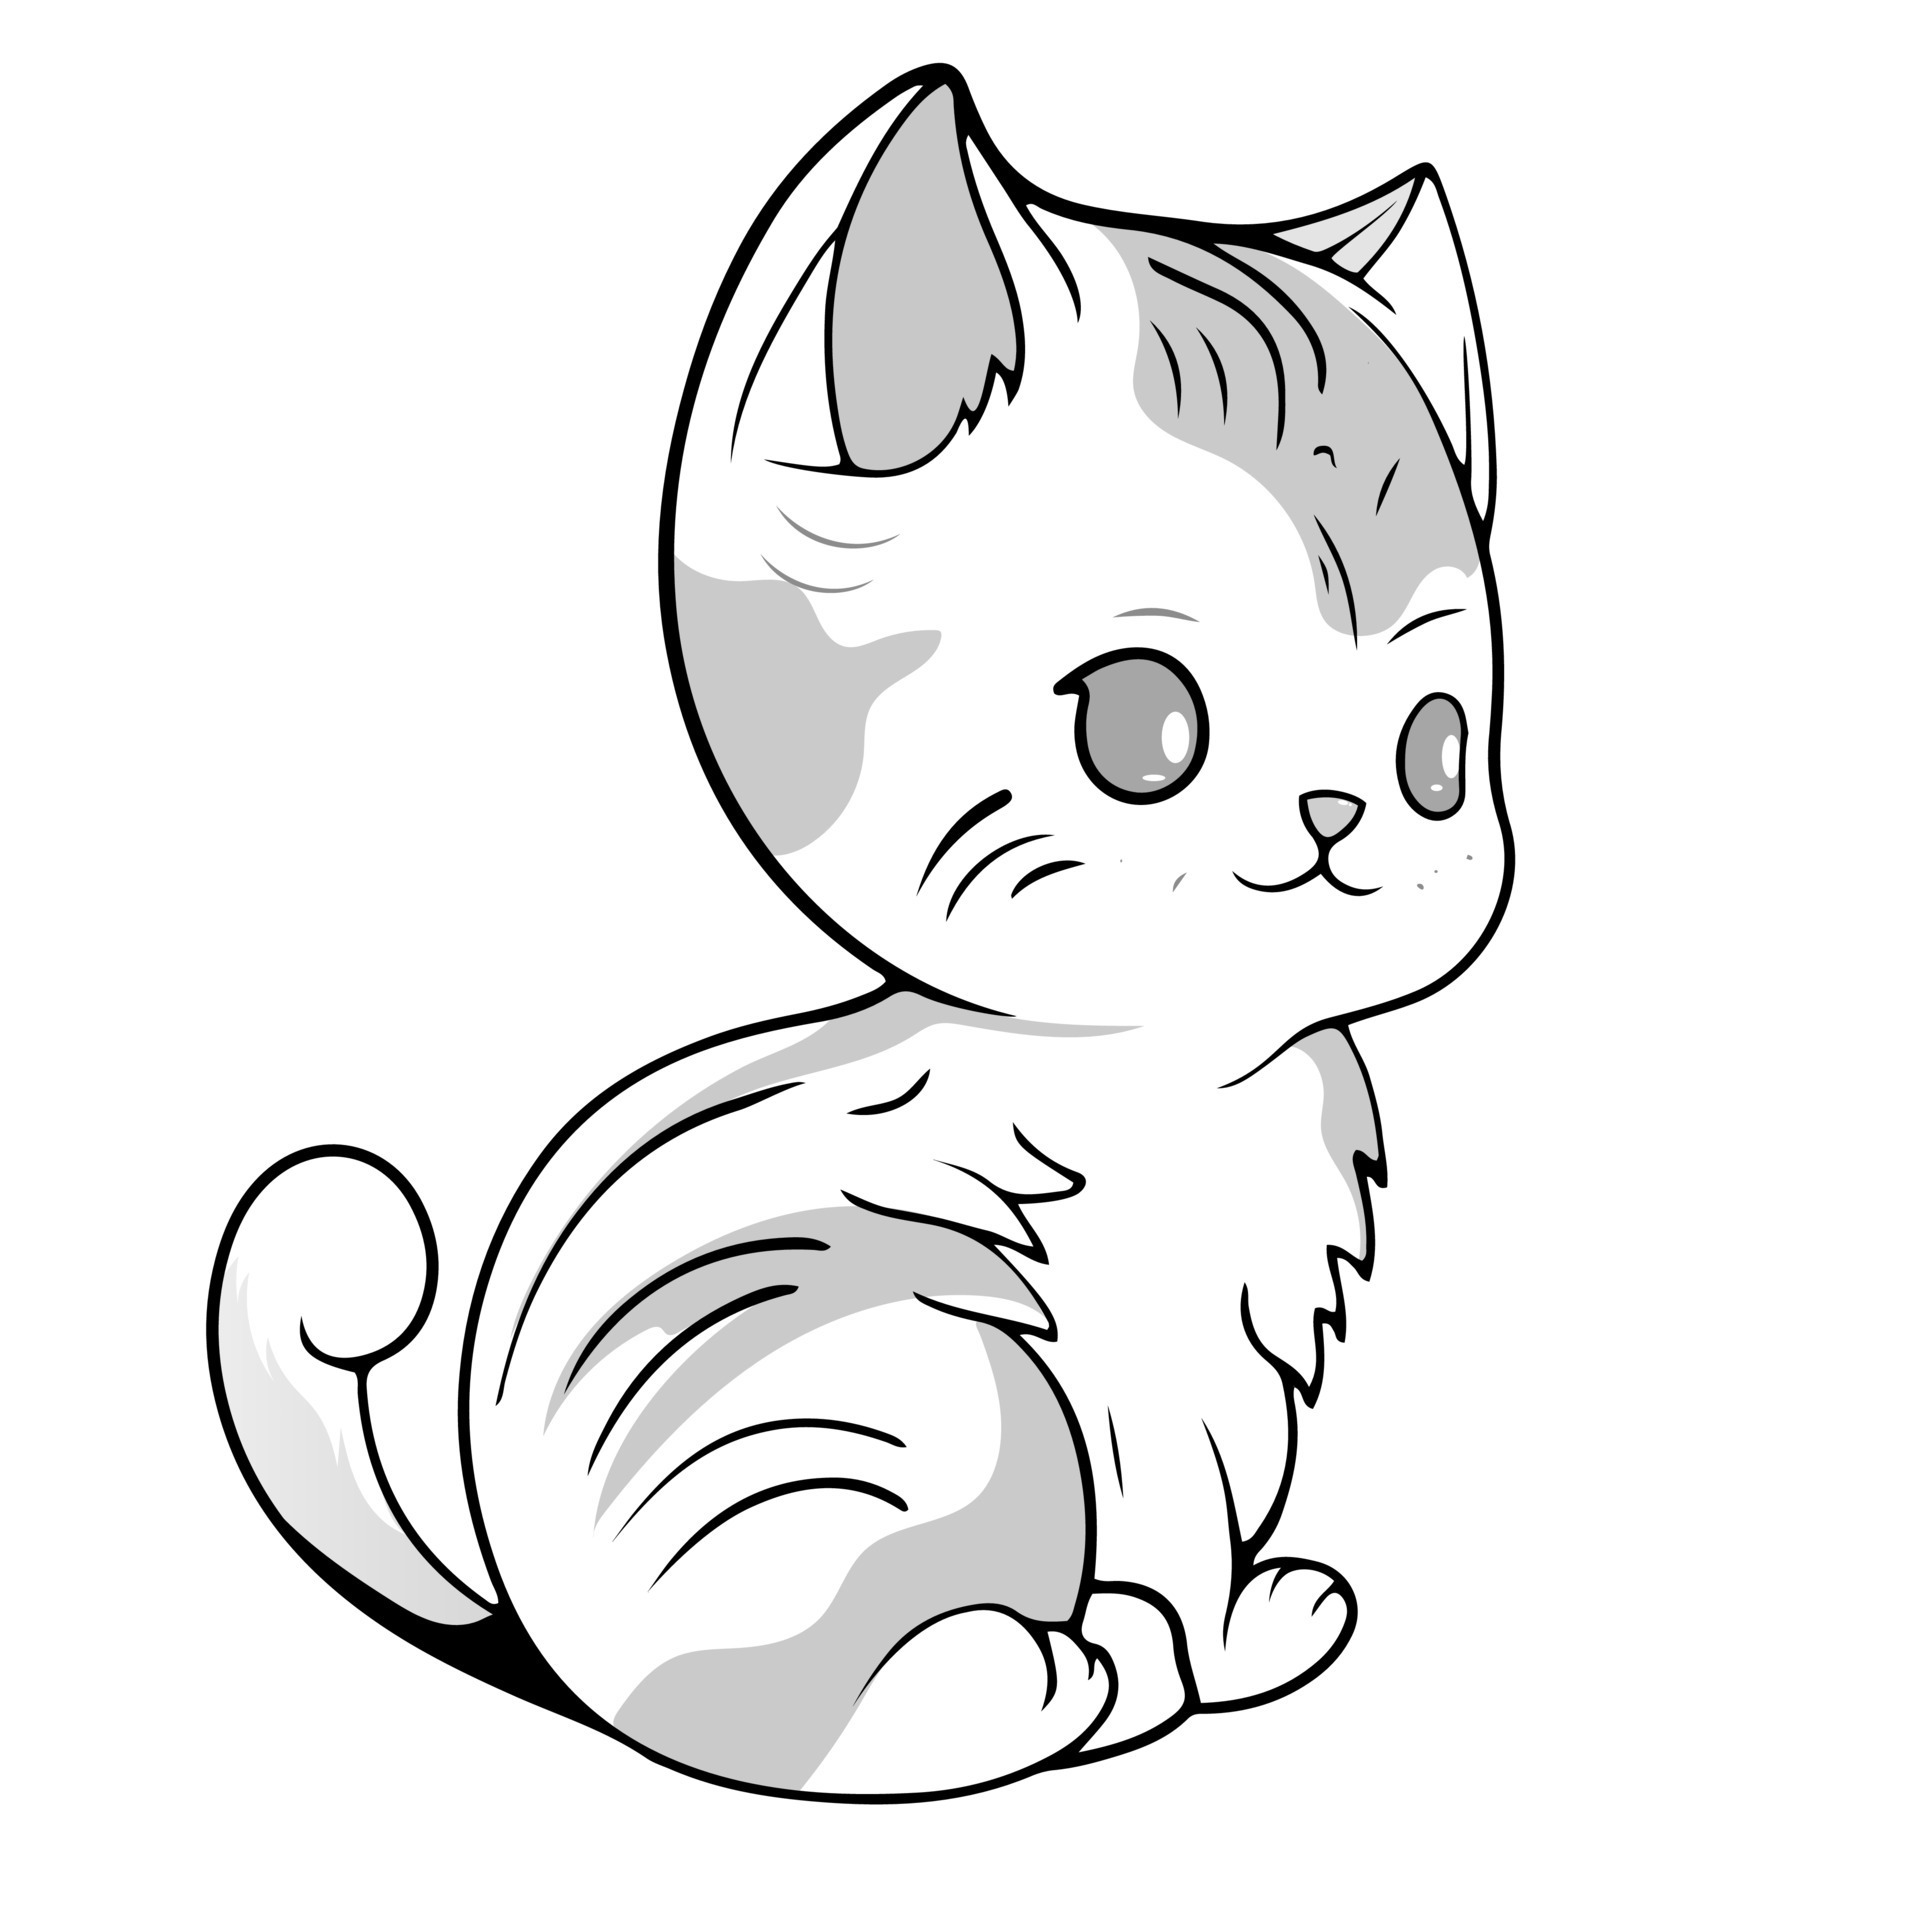 Anime cat coloring pages | Coloring pages to download and print